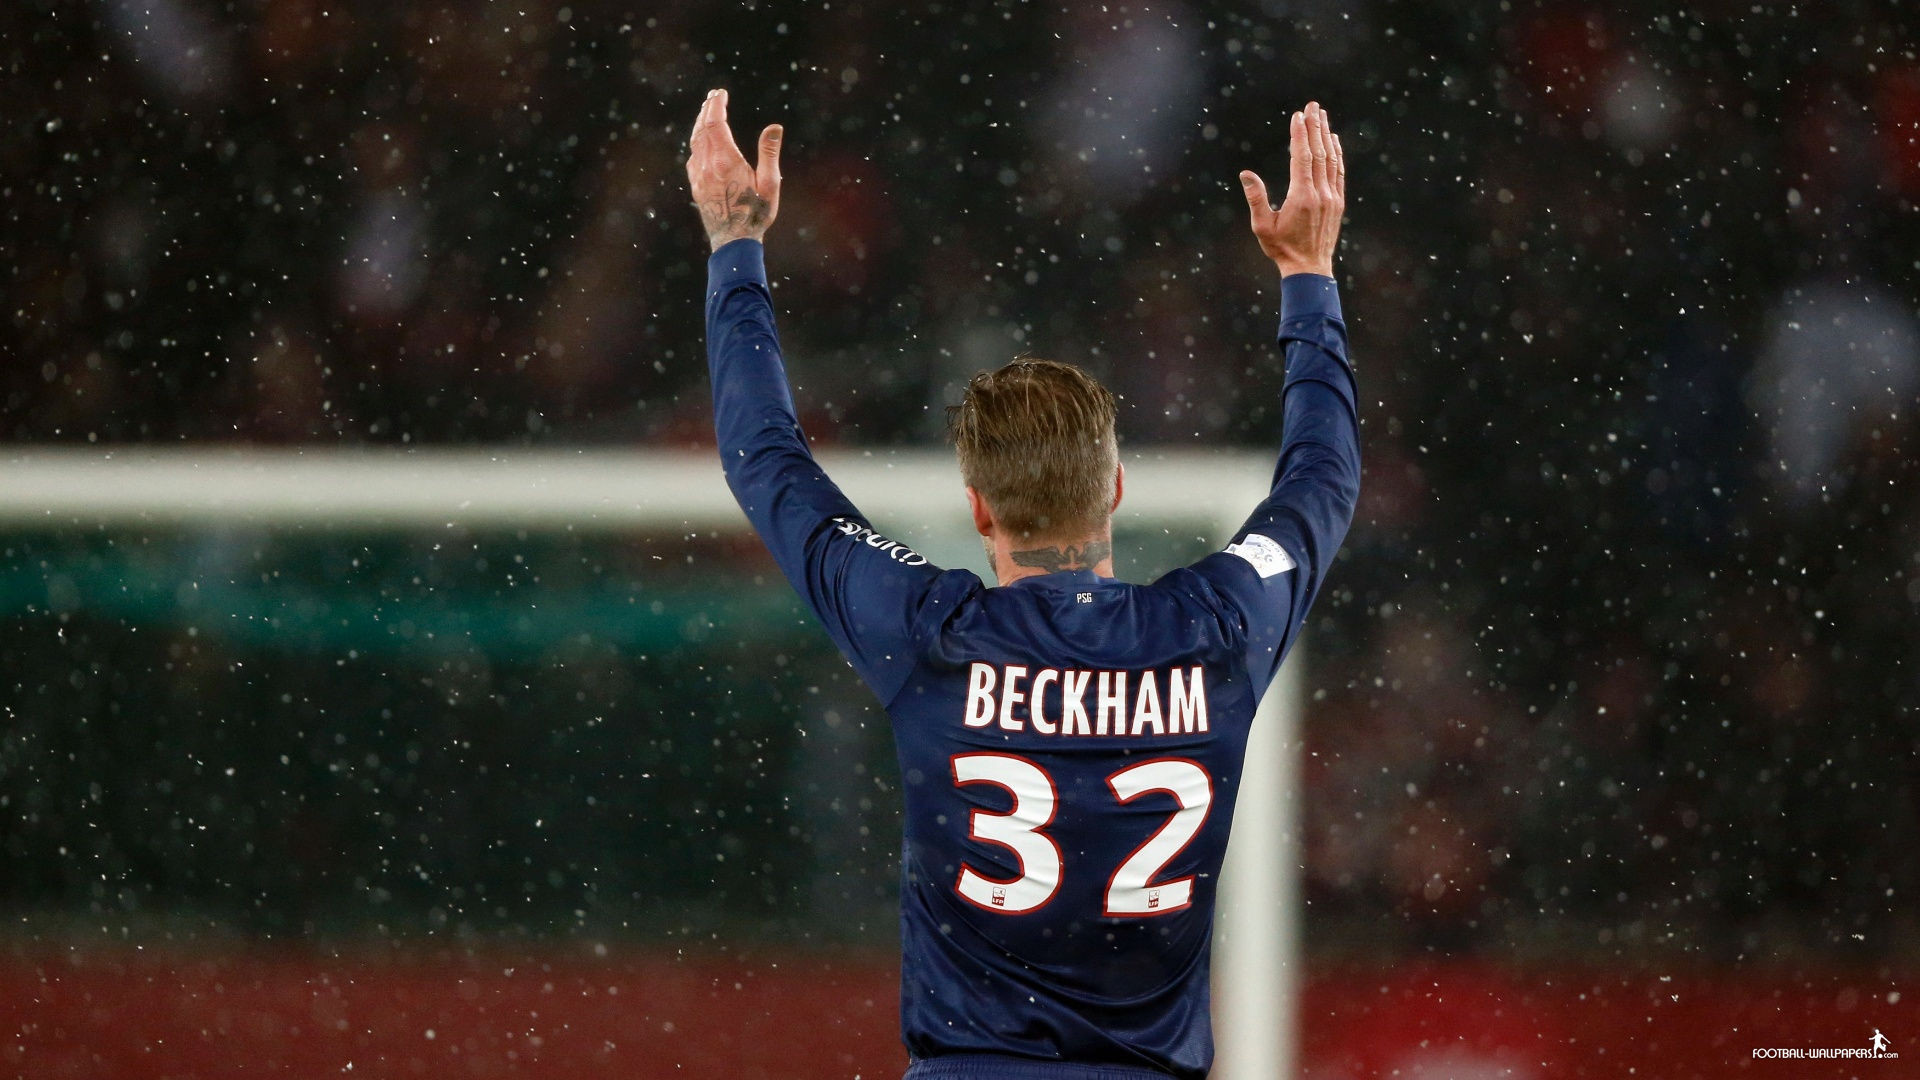 1920x1080 David Beckham Hd 1080p Wallpapers: Players, Teams, Leagues Wallpapers